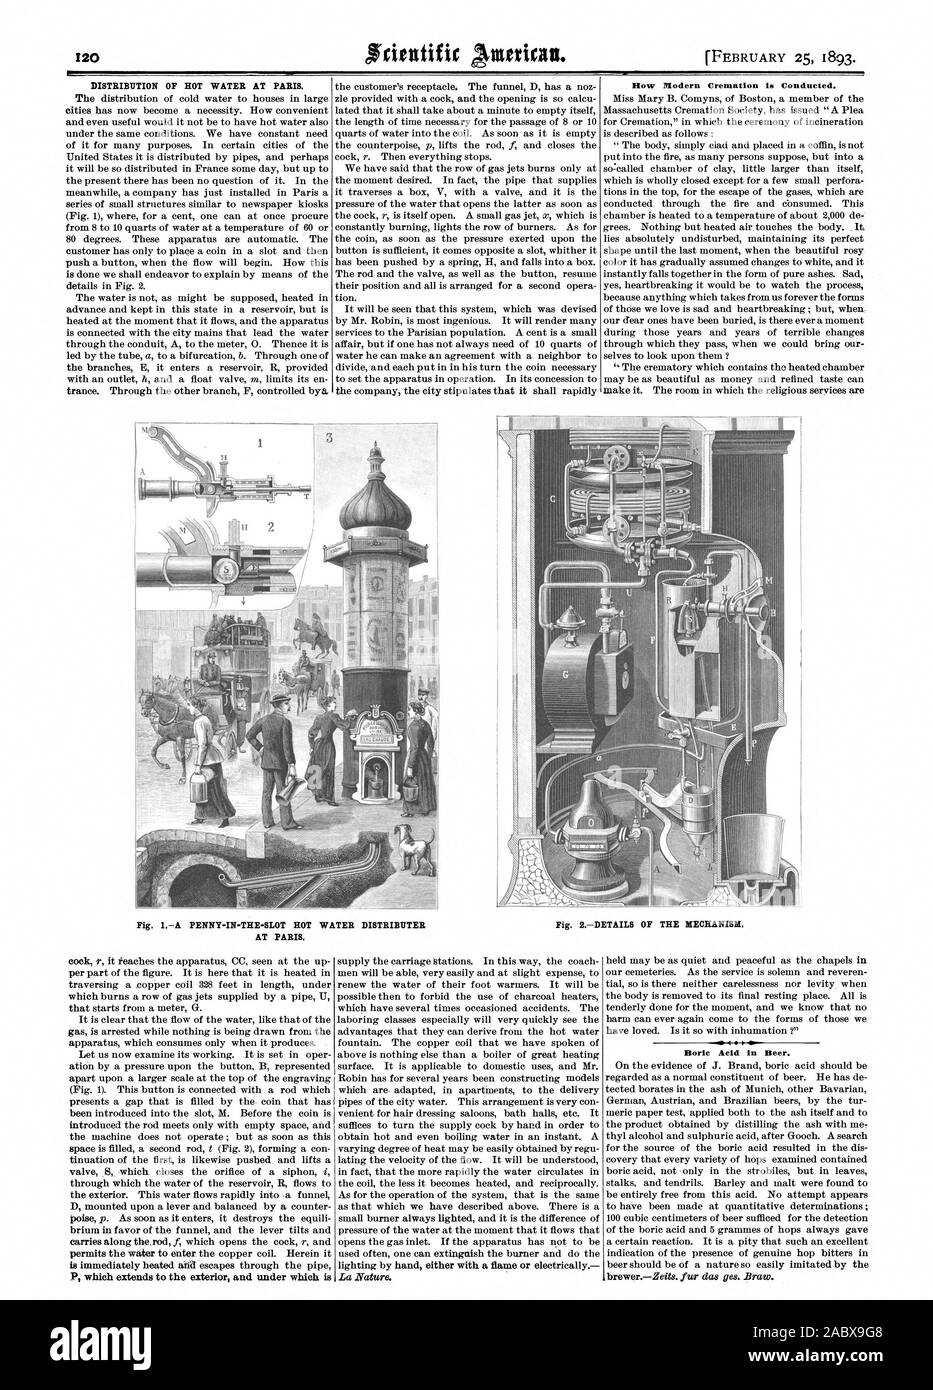 DISTRIBUTION OF HOT WATER AT PARIS. How Modern Cremation is Conducted. Fig. 1A PENNY-IN-THE-SLOT HOT WATER DISTRIBUTER AT PARIS. Fig. 2DETAILS OF THE MECHANISM.  Boric Acid in Beer., scientific american, 1893-02-25 Stock Photo